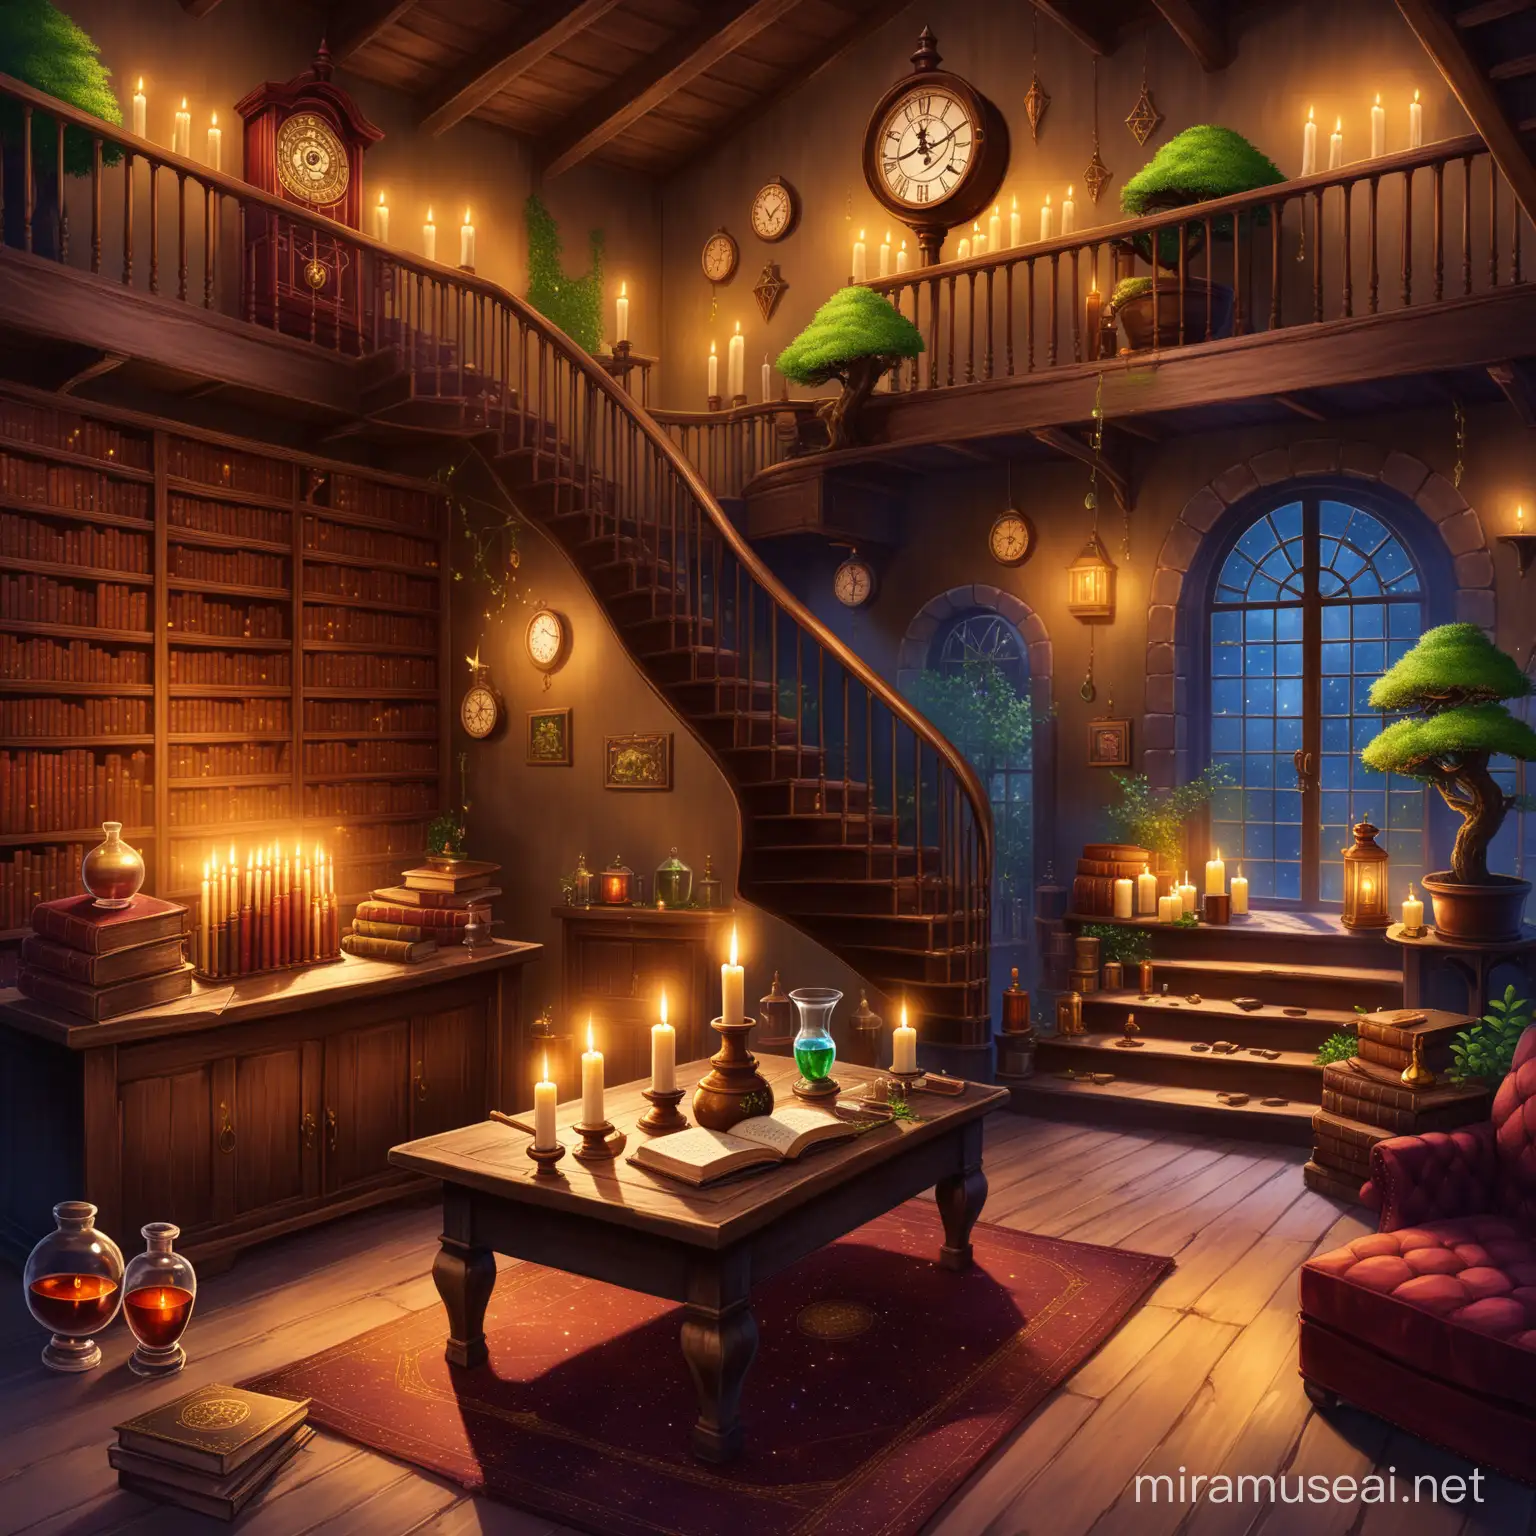 small room, brown walls, old grandfather clock, candles, leather books, brown books, dark red books, gold books, rusty books, bookcase with spell books, a wooden wand, crystal balls, herbs, potion, moss, green, dim lights, magic, spells, an old big bonsai tree inside, magic shop, winding staircase, crystals, plants, old frayed rug, boots, enchanted, mystical, red cushions, guitar, ink and quill, tea, tea leaves, crystal ball sets,  witches hats, astrology charts, bowl of water, 